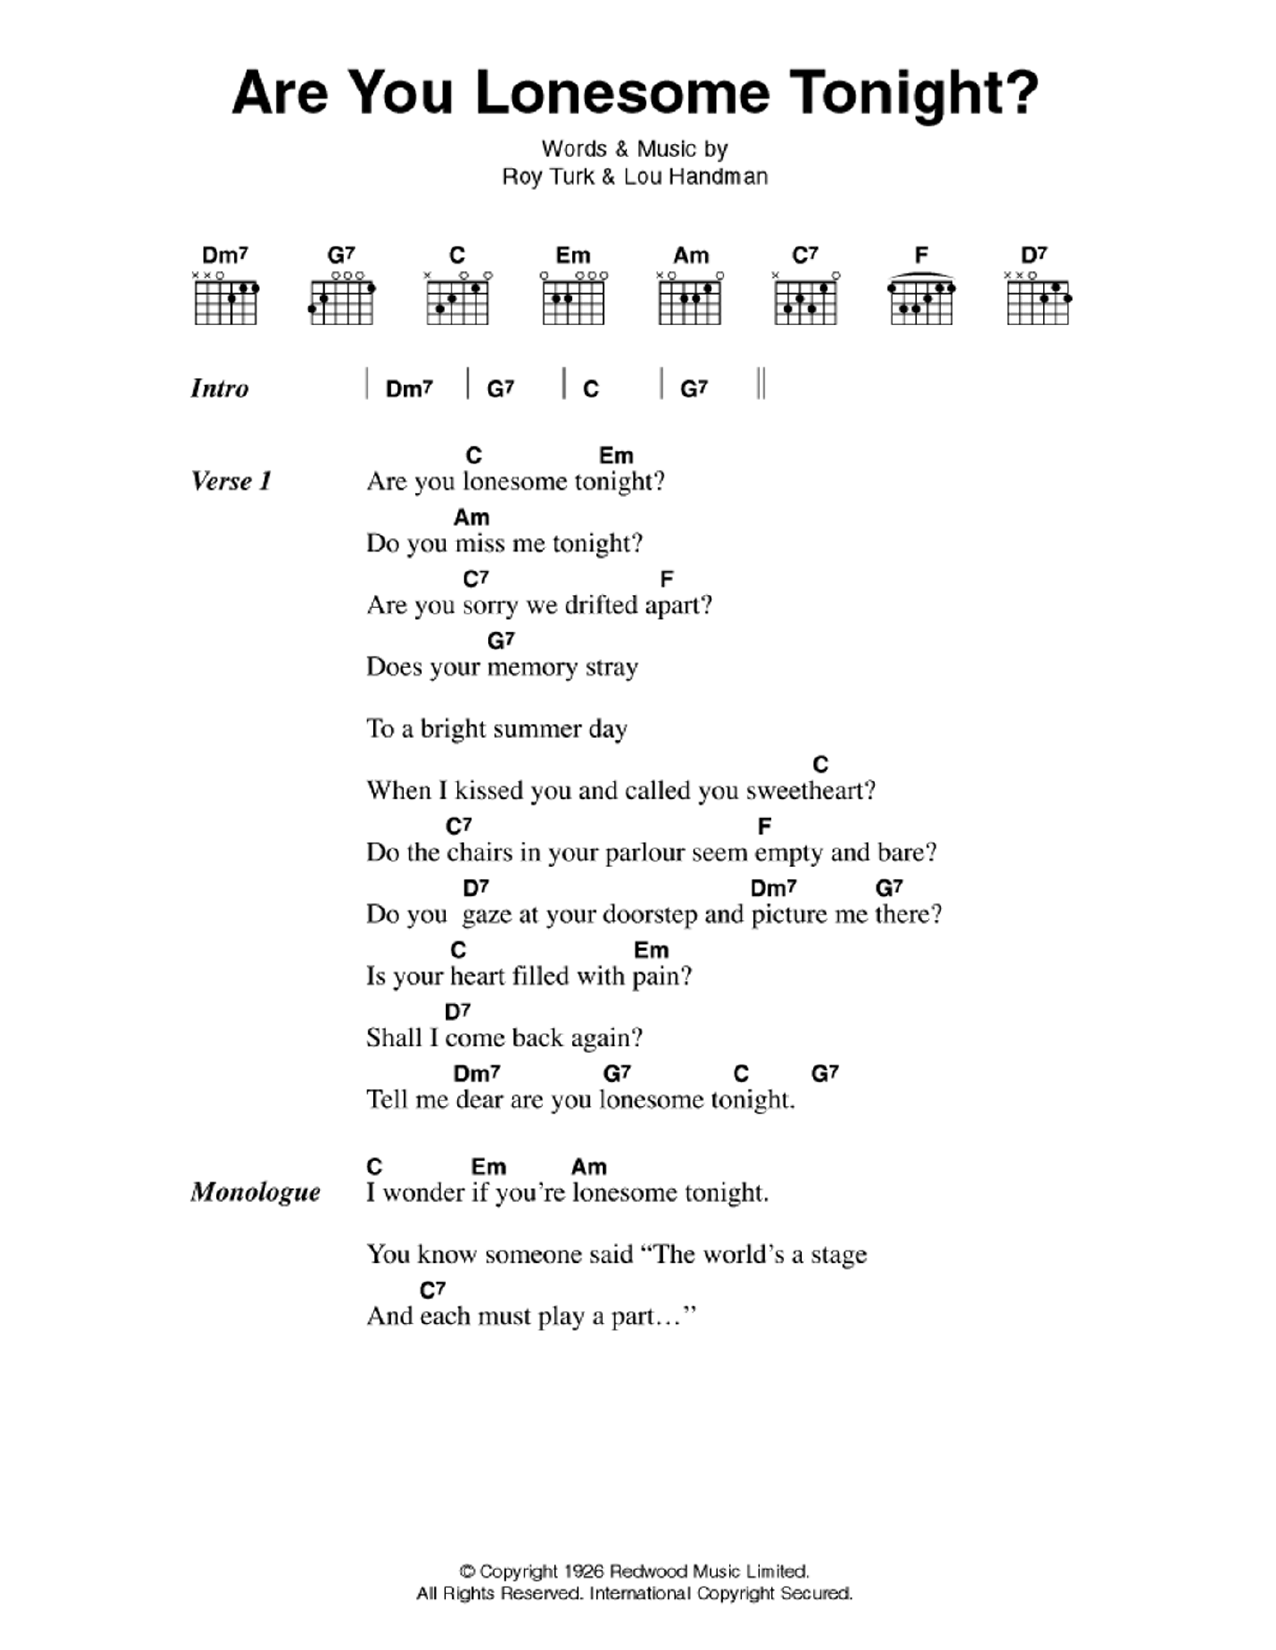 Download Elvis Presley Are You Lonesome Tonight? Sheet Music